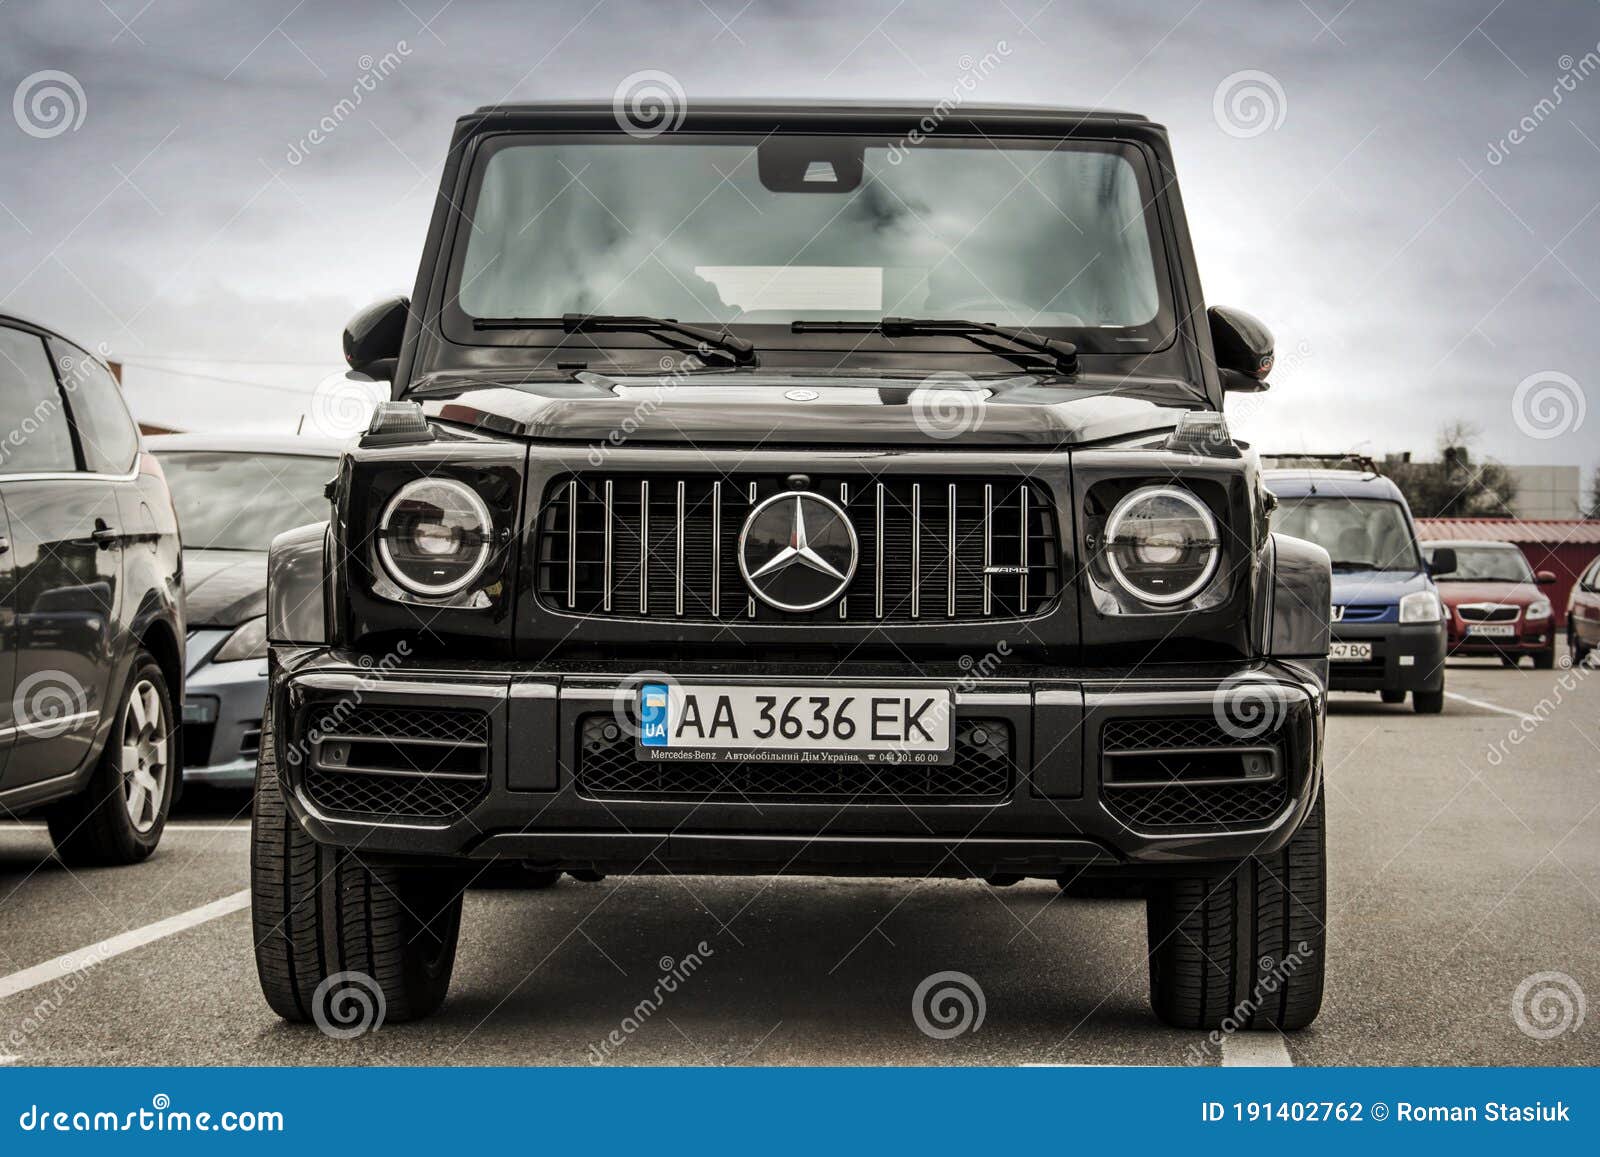 Kiev Ukraine May 19 Mercedes Benz G Class Amg In The City Parked Car Black Suv Editorial Photography Image Of Plastic Rear